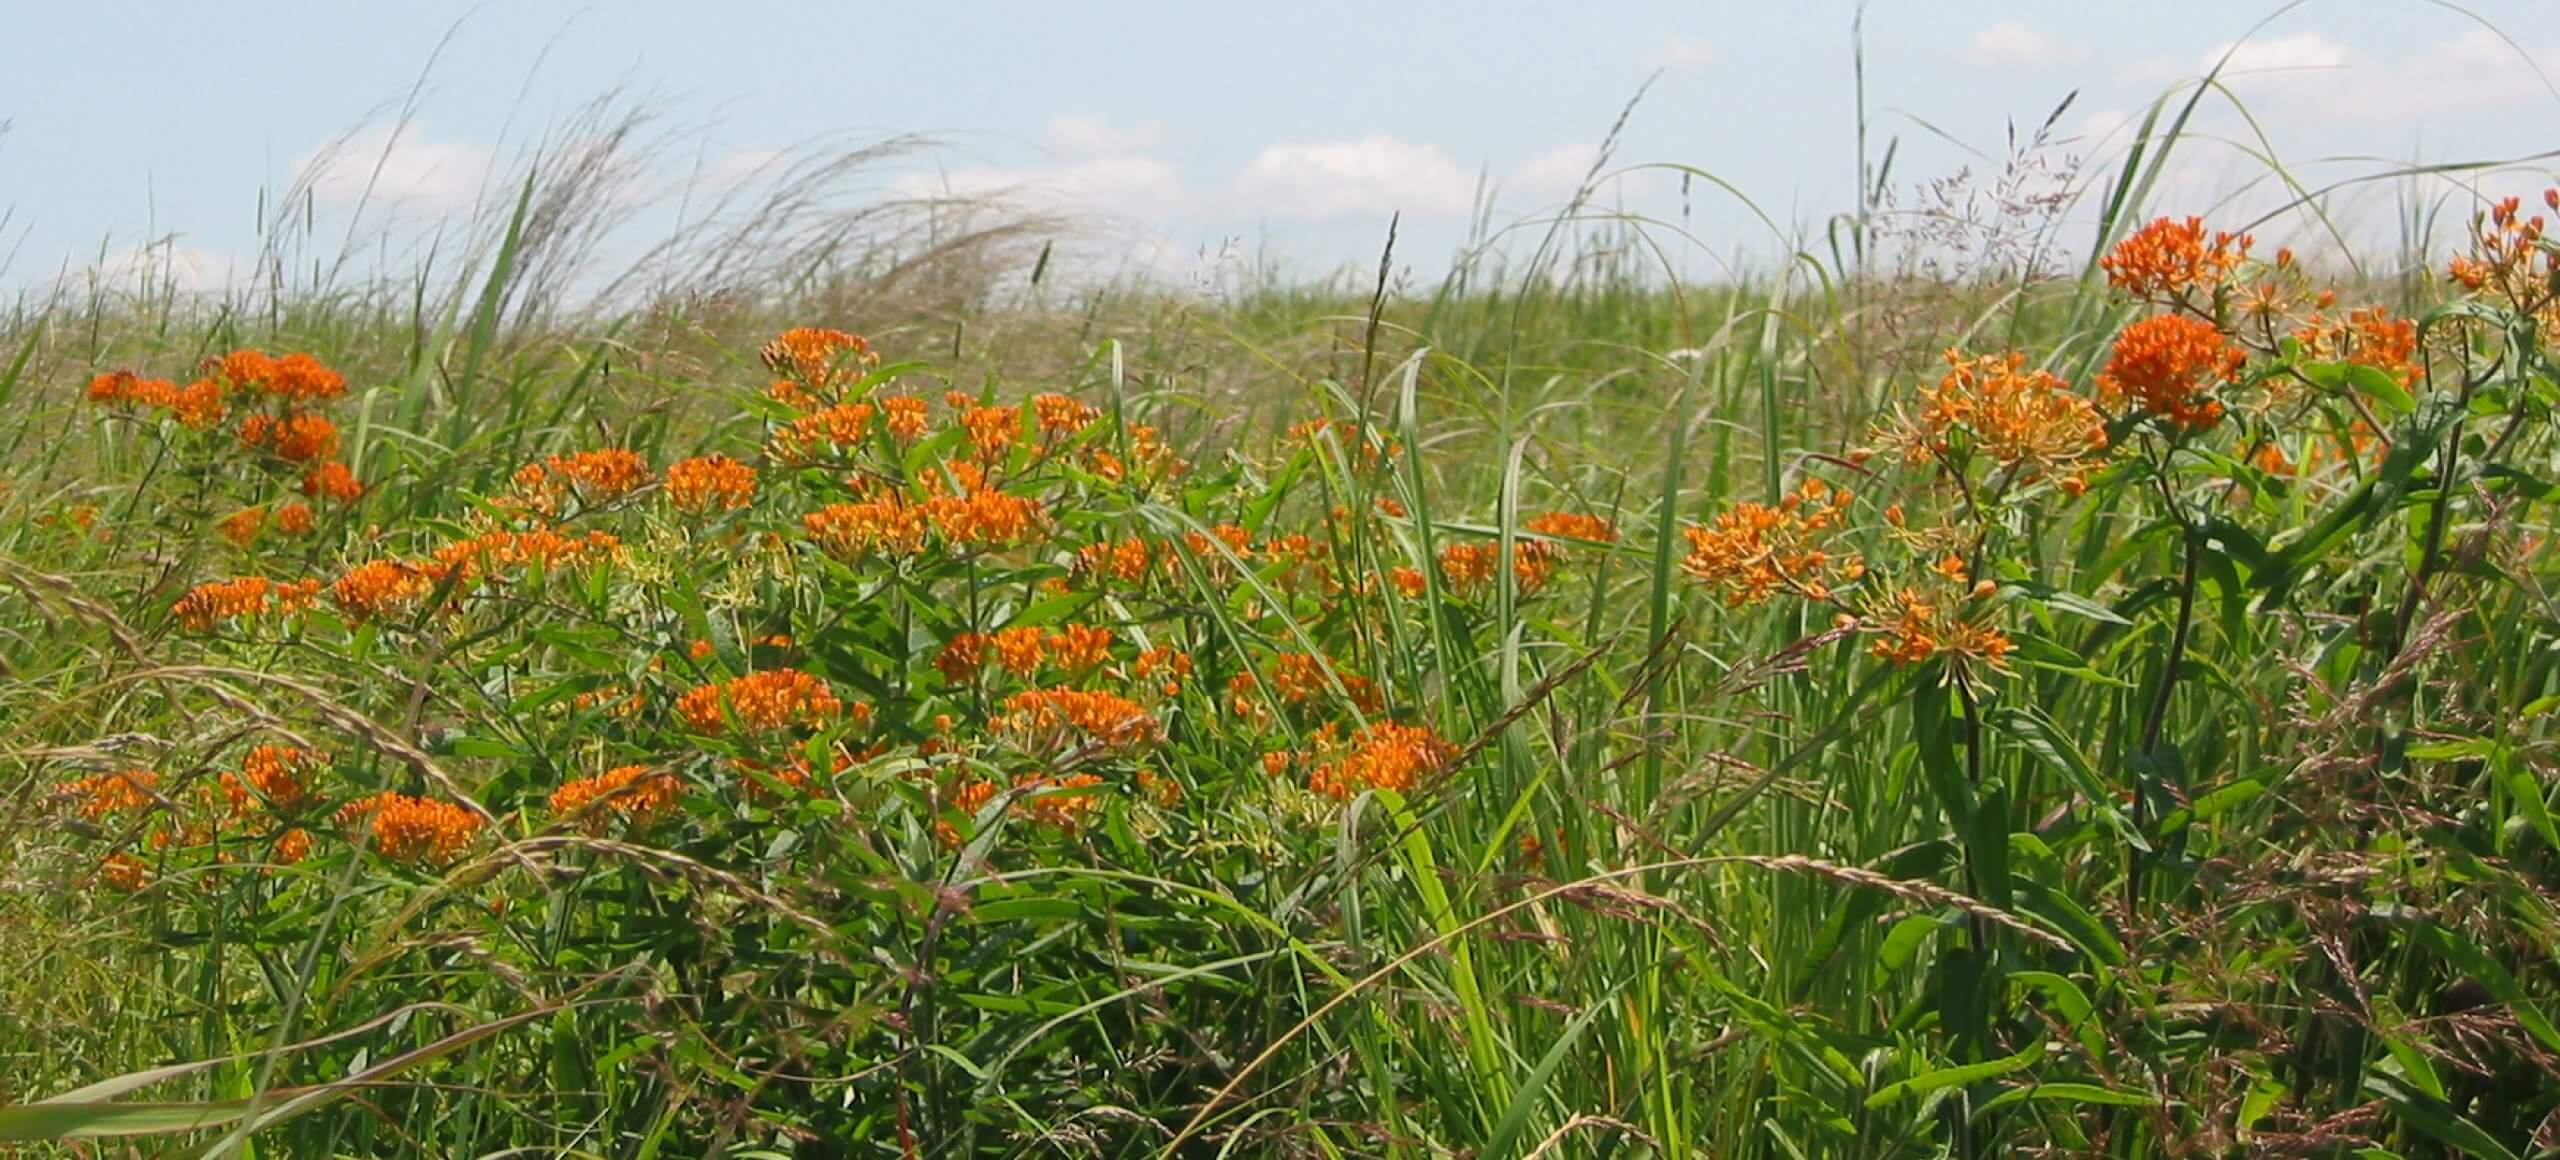 A landscape of orange Butterfly Weed wildflowers in a green field with a blue sky.